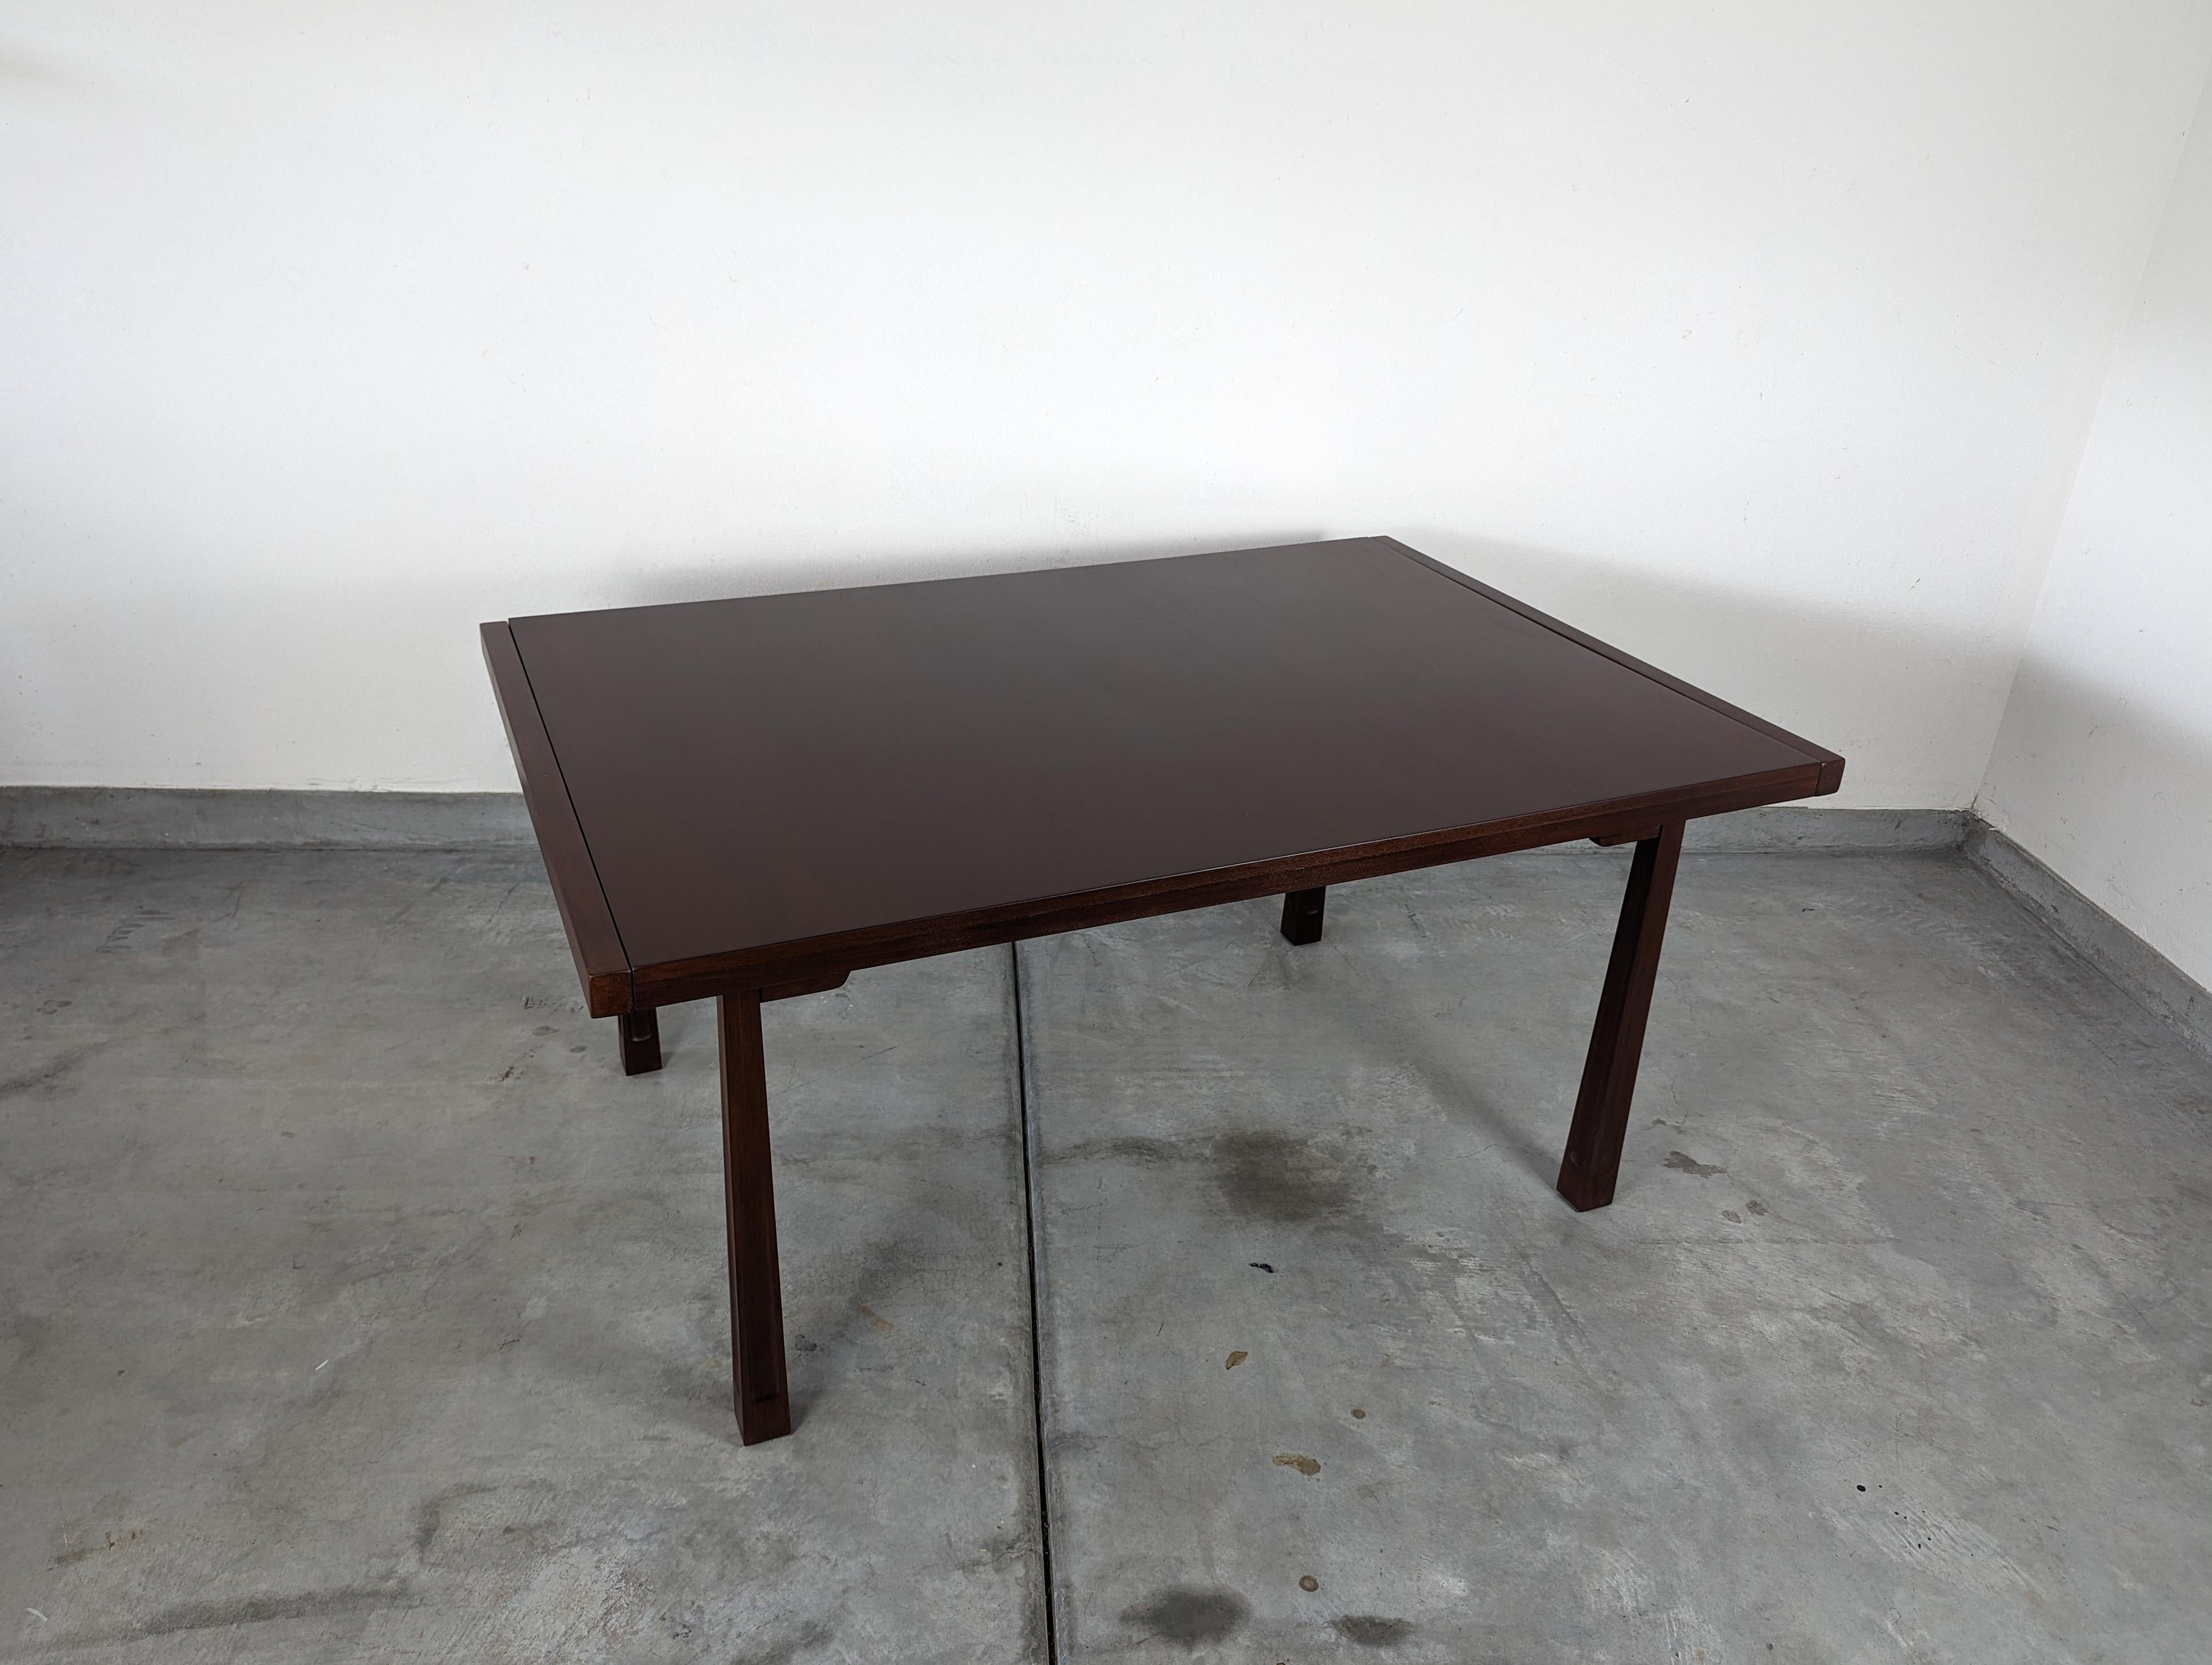 Mid-Century Modern Mid-Century Dining Table by Edmond J. Spence for Industria Mueblera of Mexico